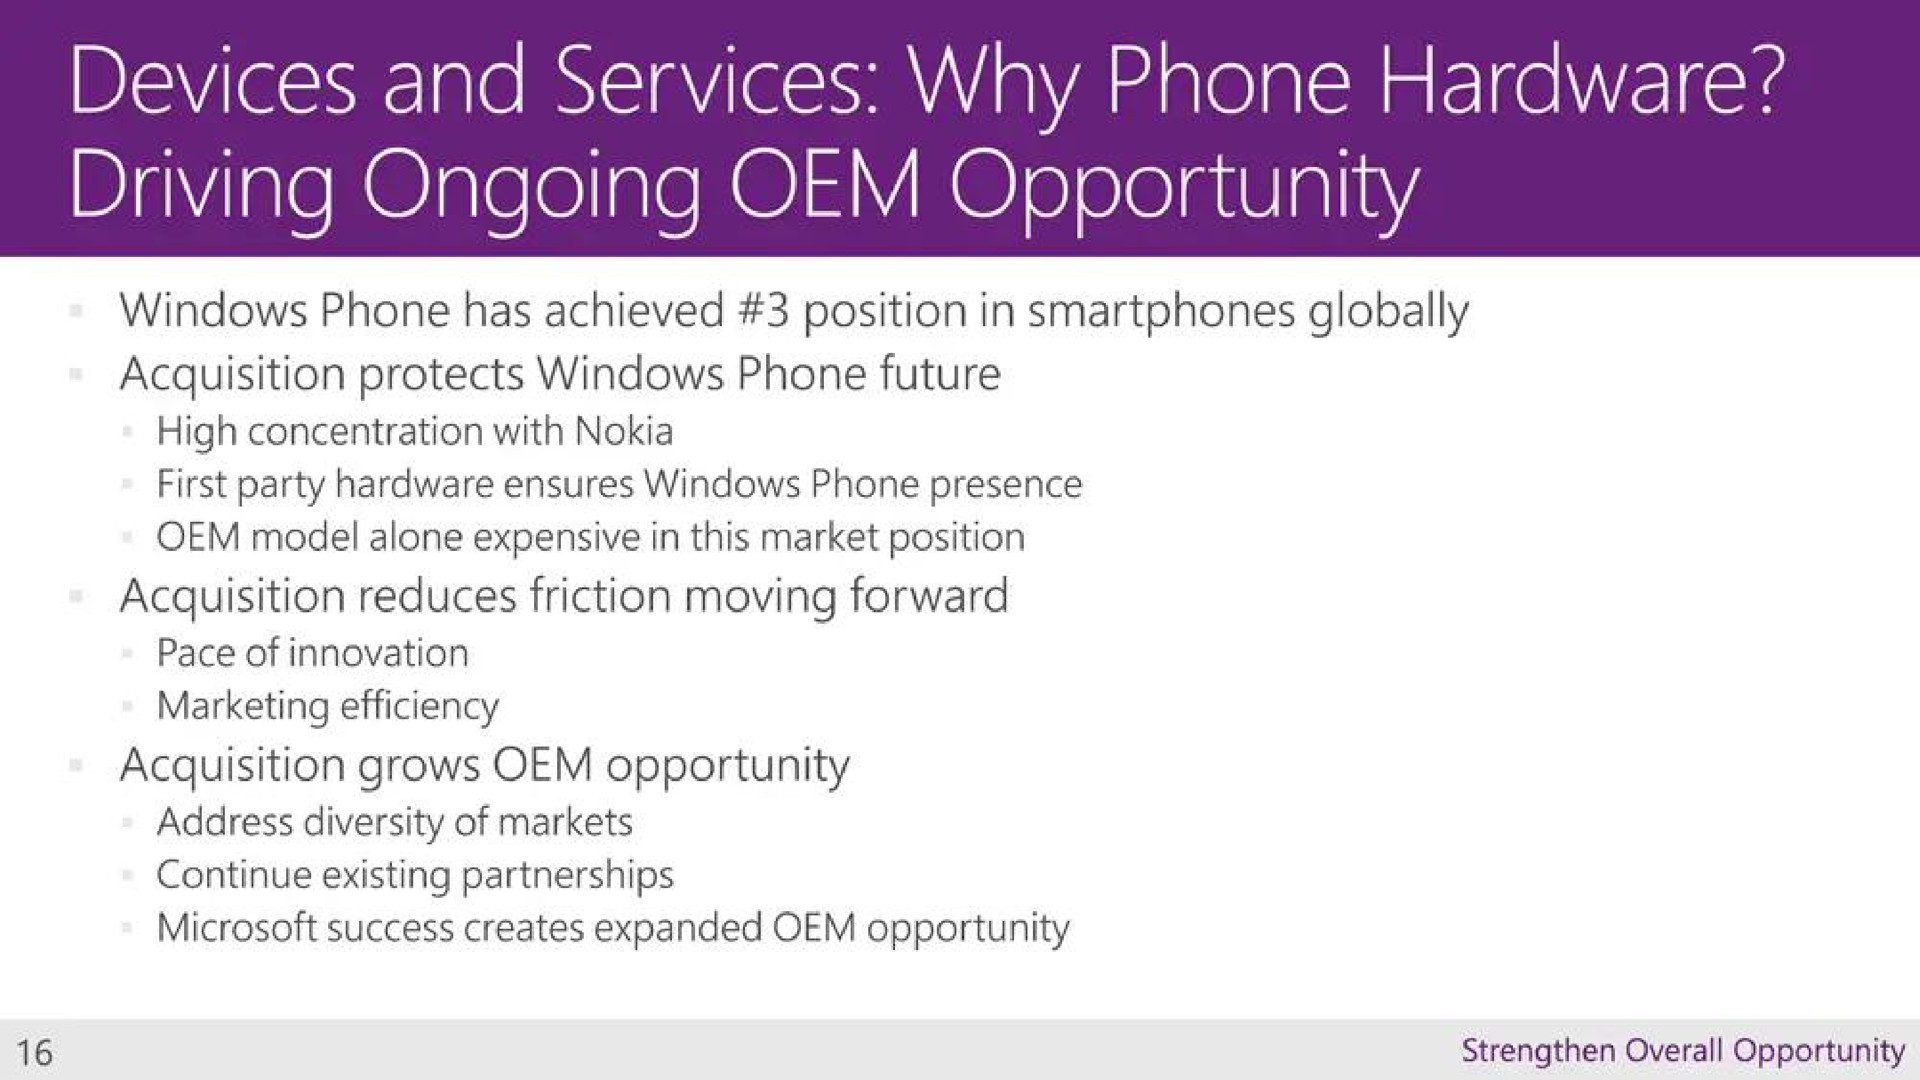 devices and services why phone hardware driving ongoing opportunity | Microsoft